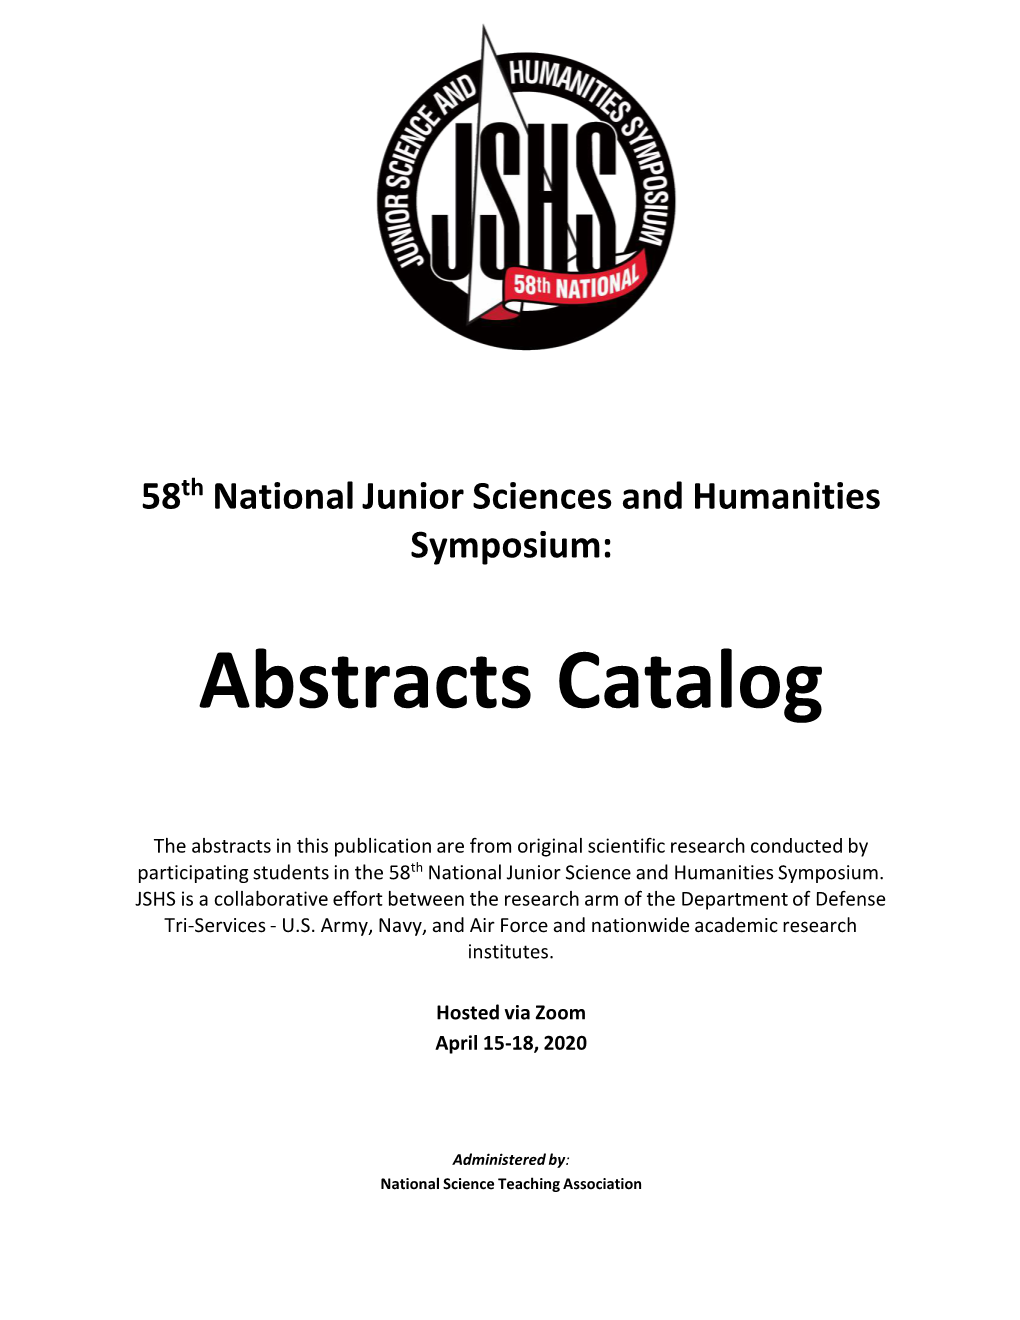 Abstracts Catalog